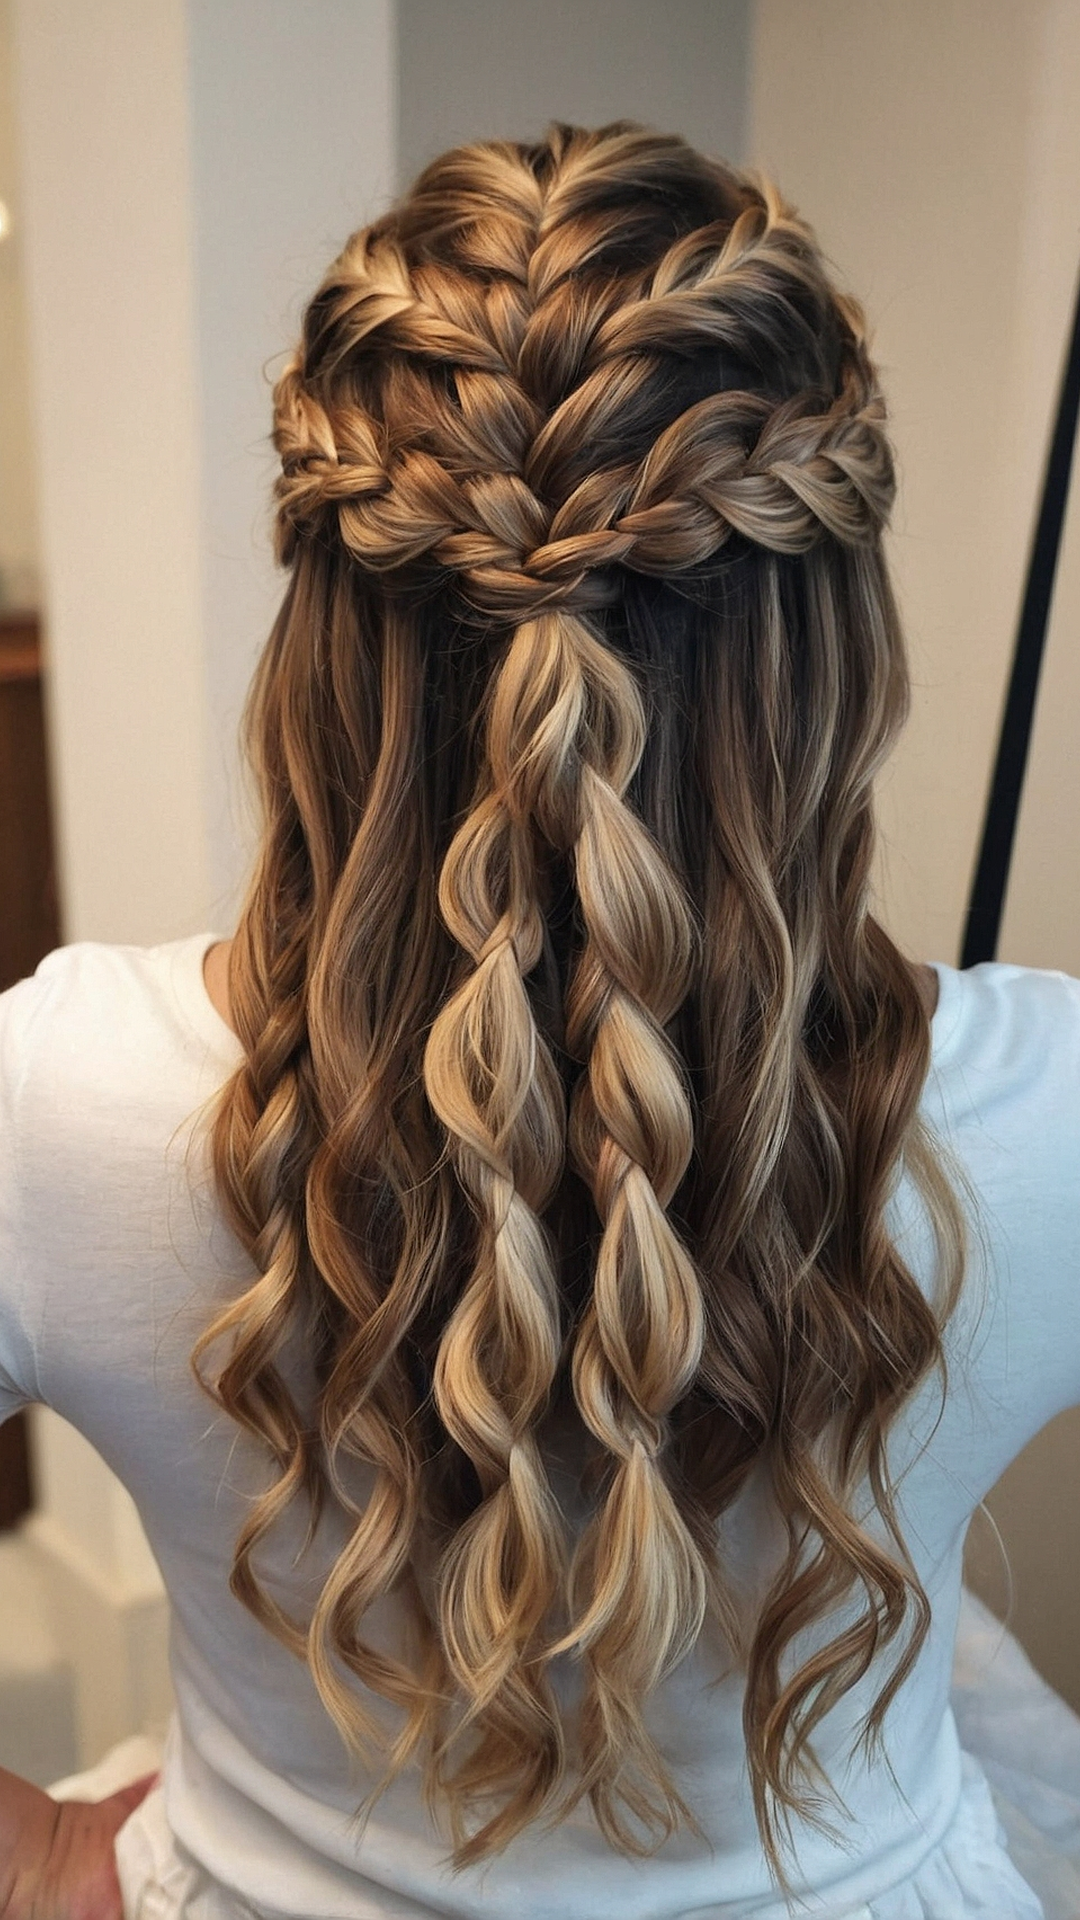 Chic and Braided: Elegant Hairstyle Ideas